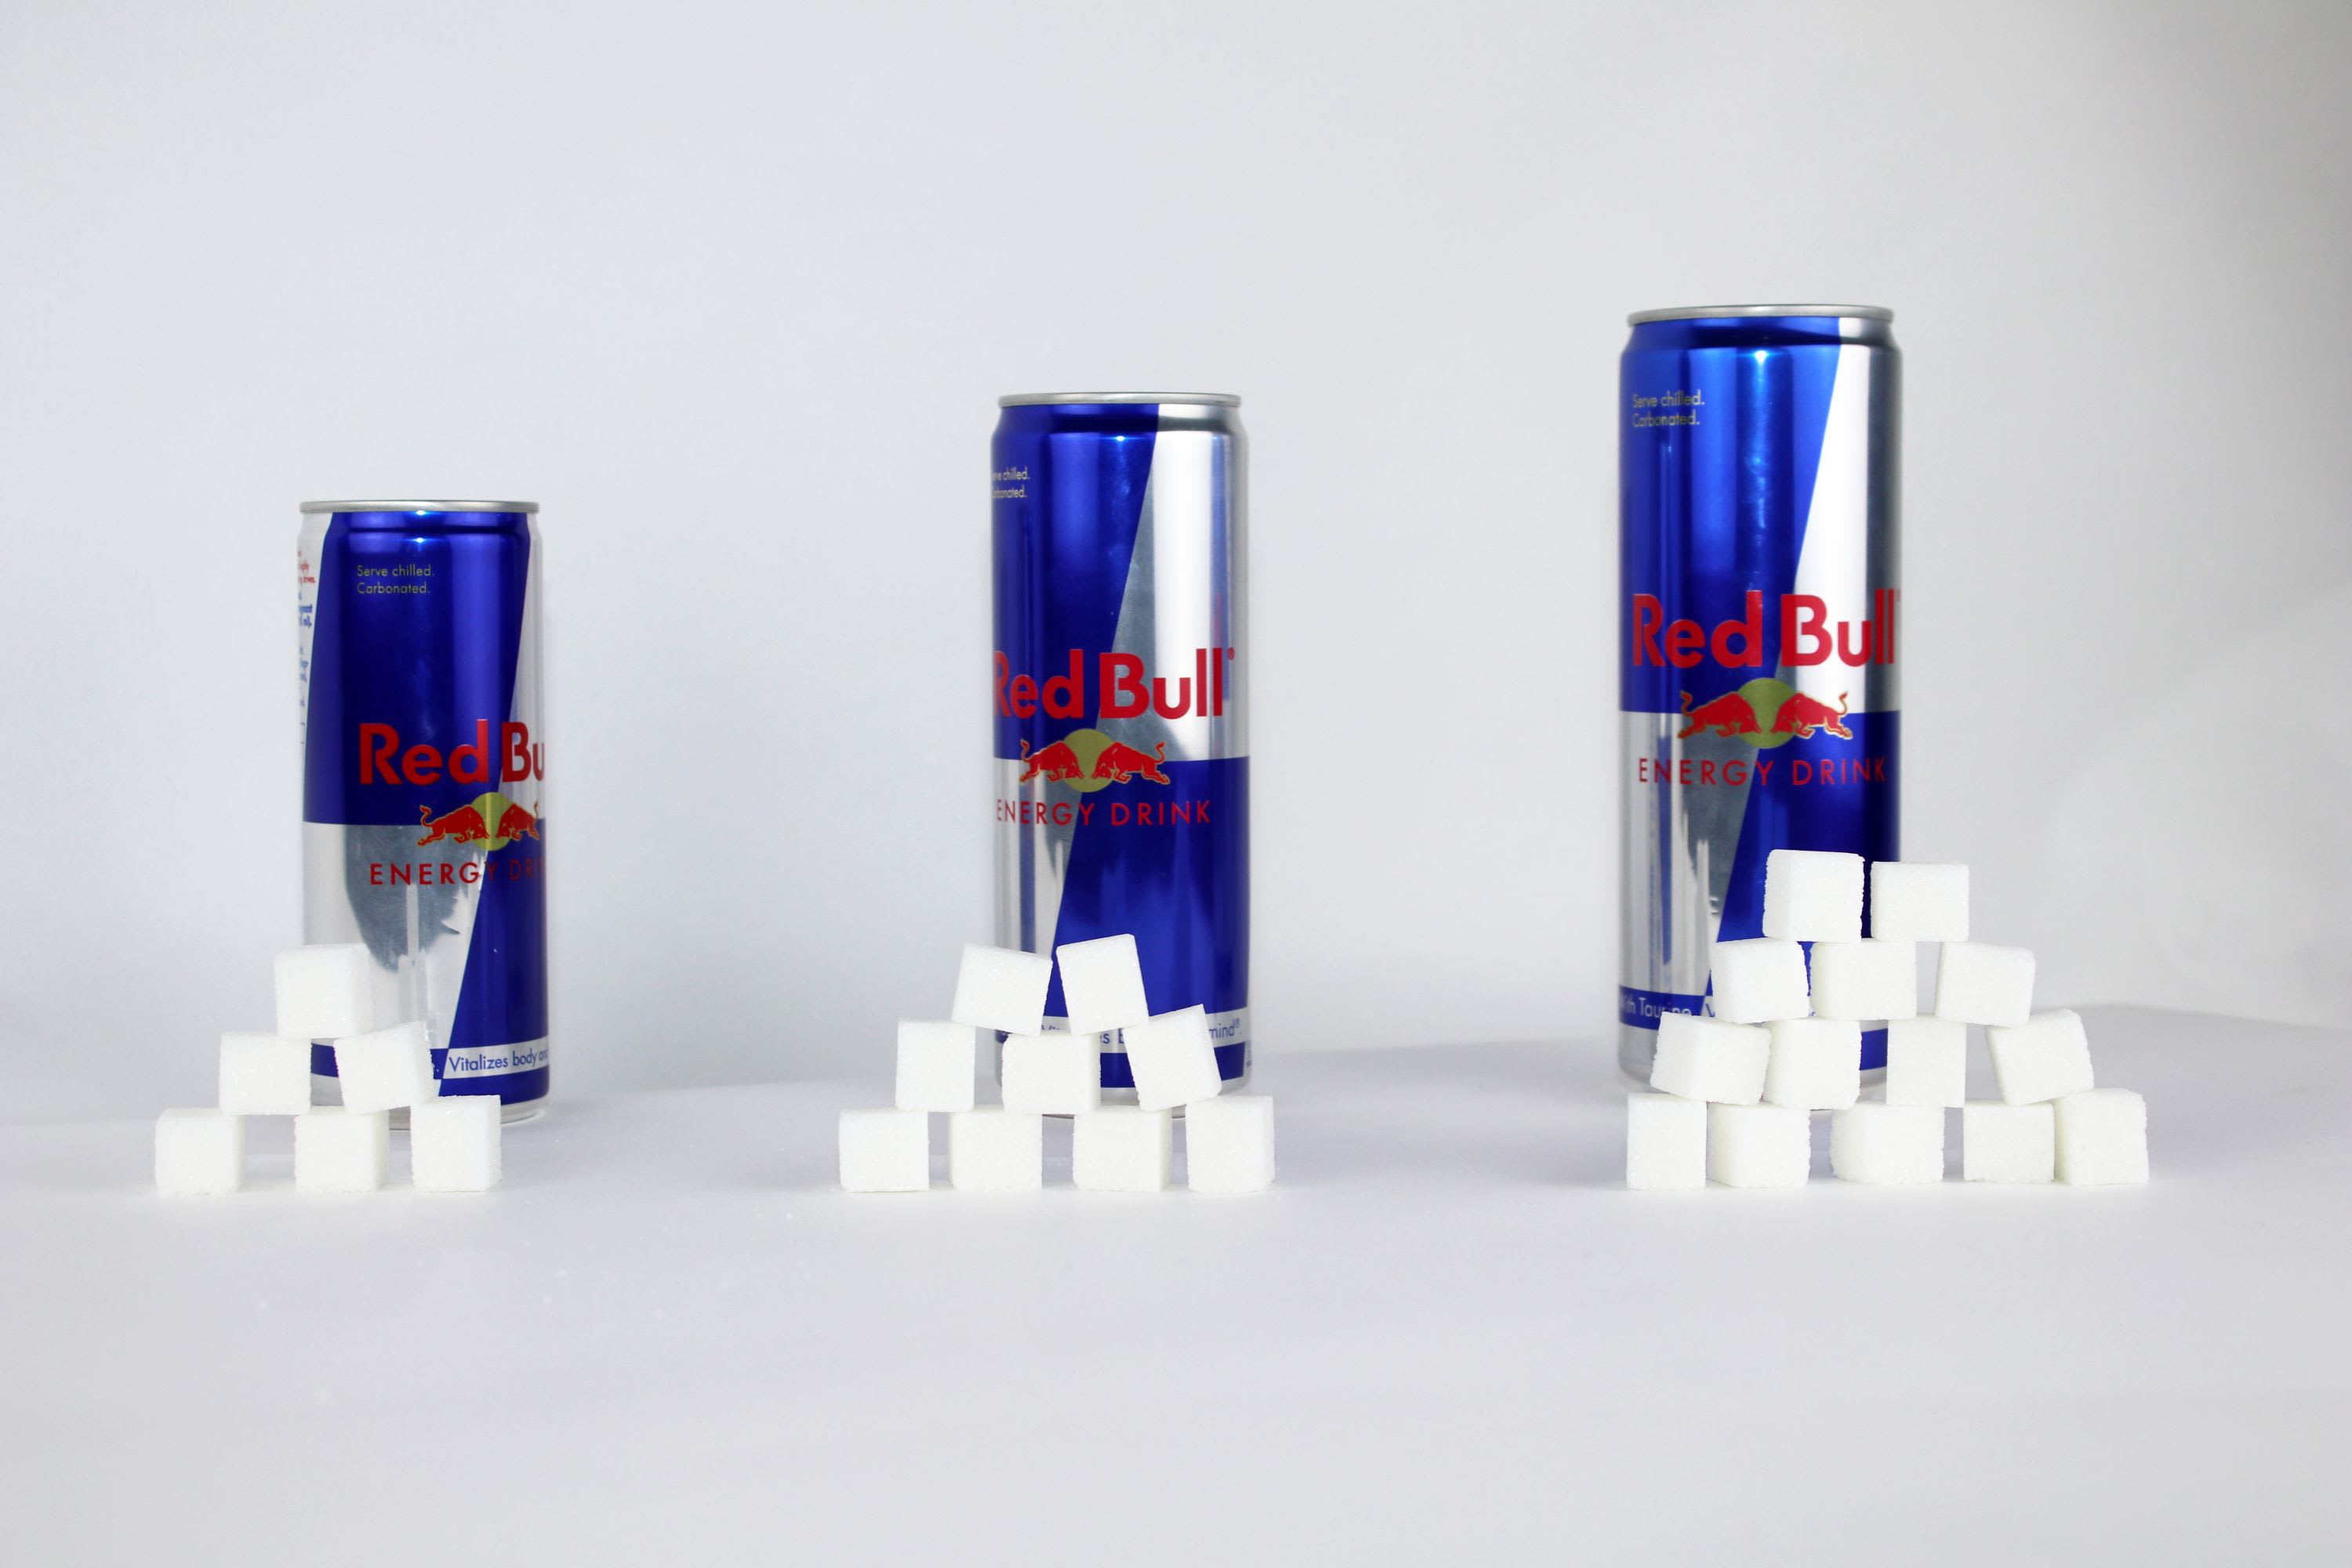 Two in three underestimate how much sugar is in energy drinks | Oral Health